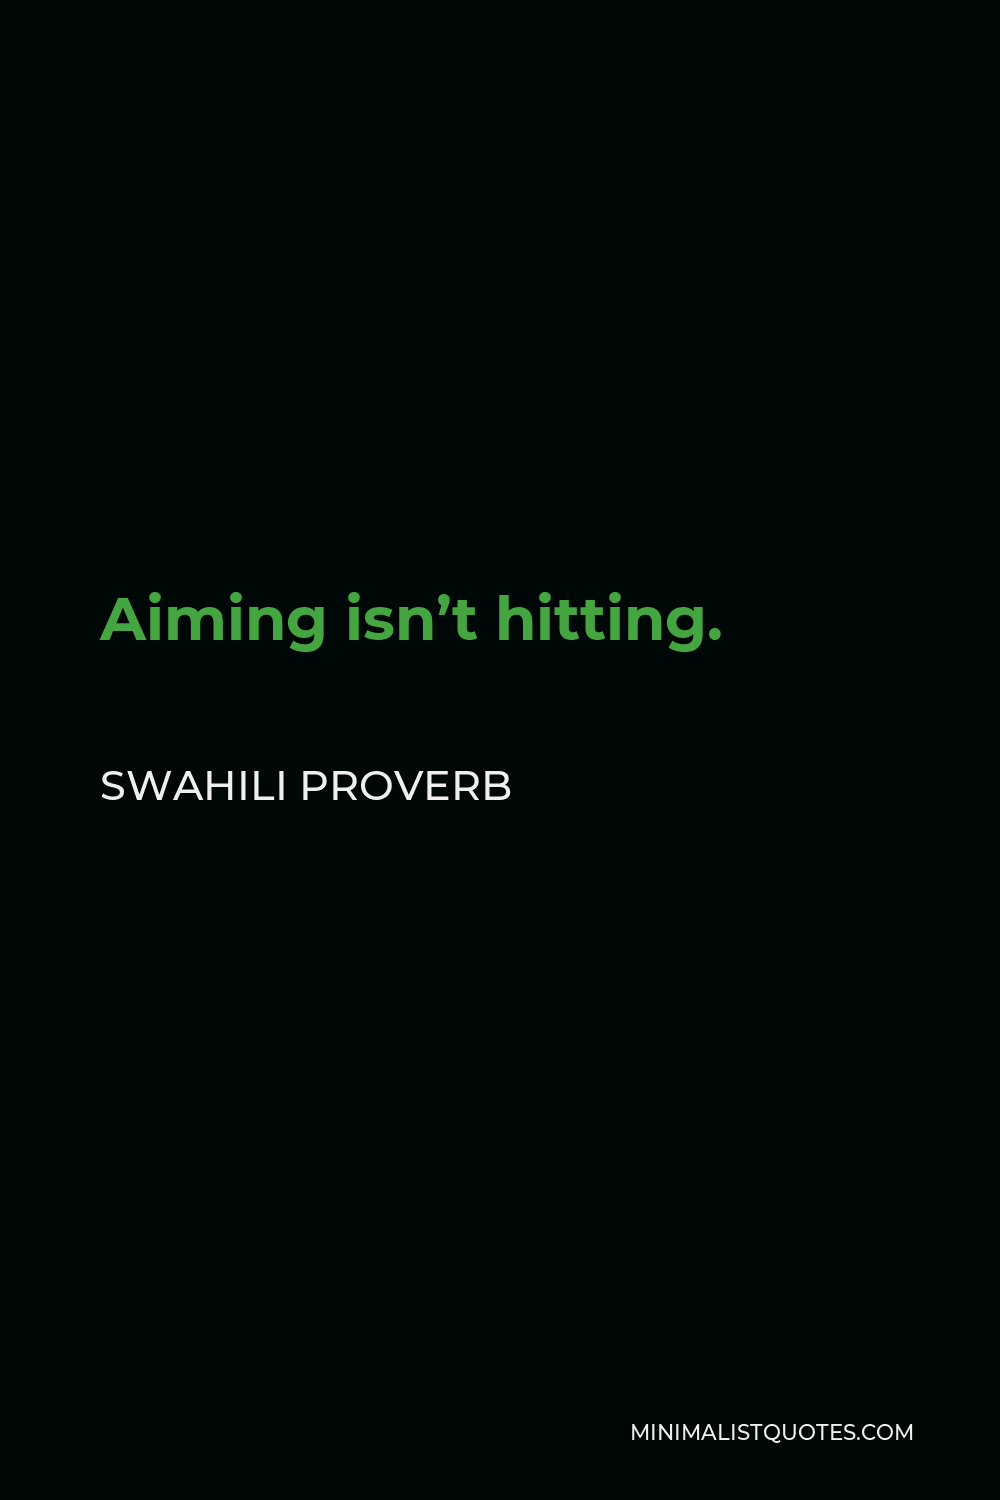 Swahili Proverb Quote - Aiming isn’t hitting.